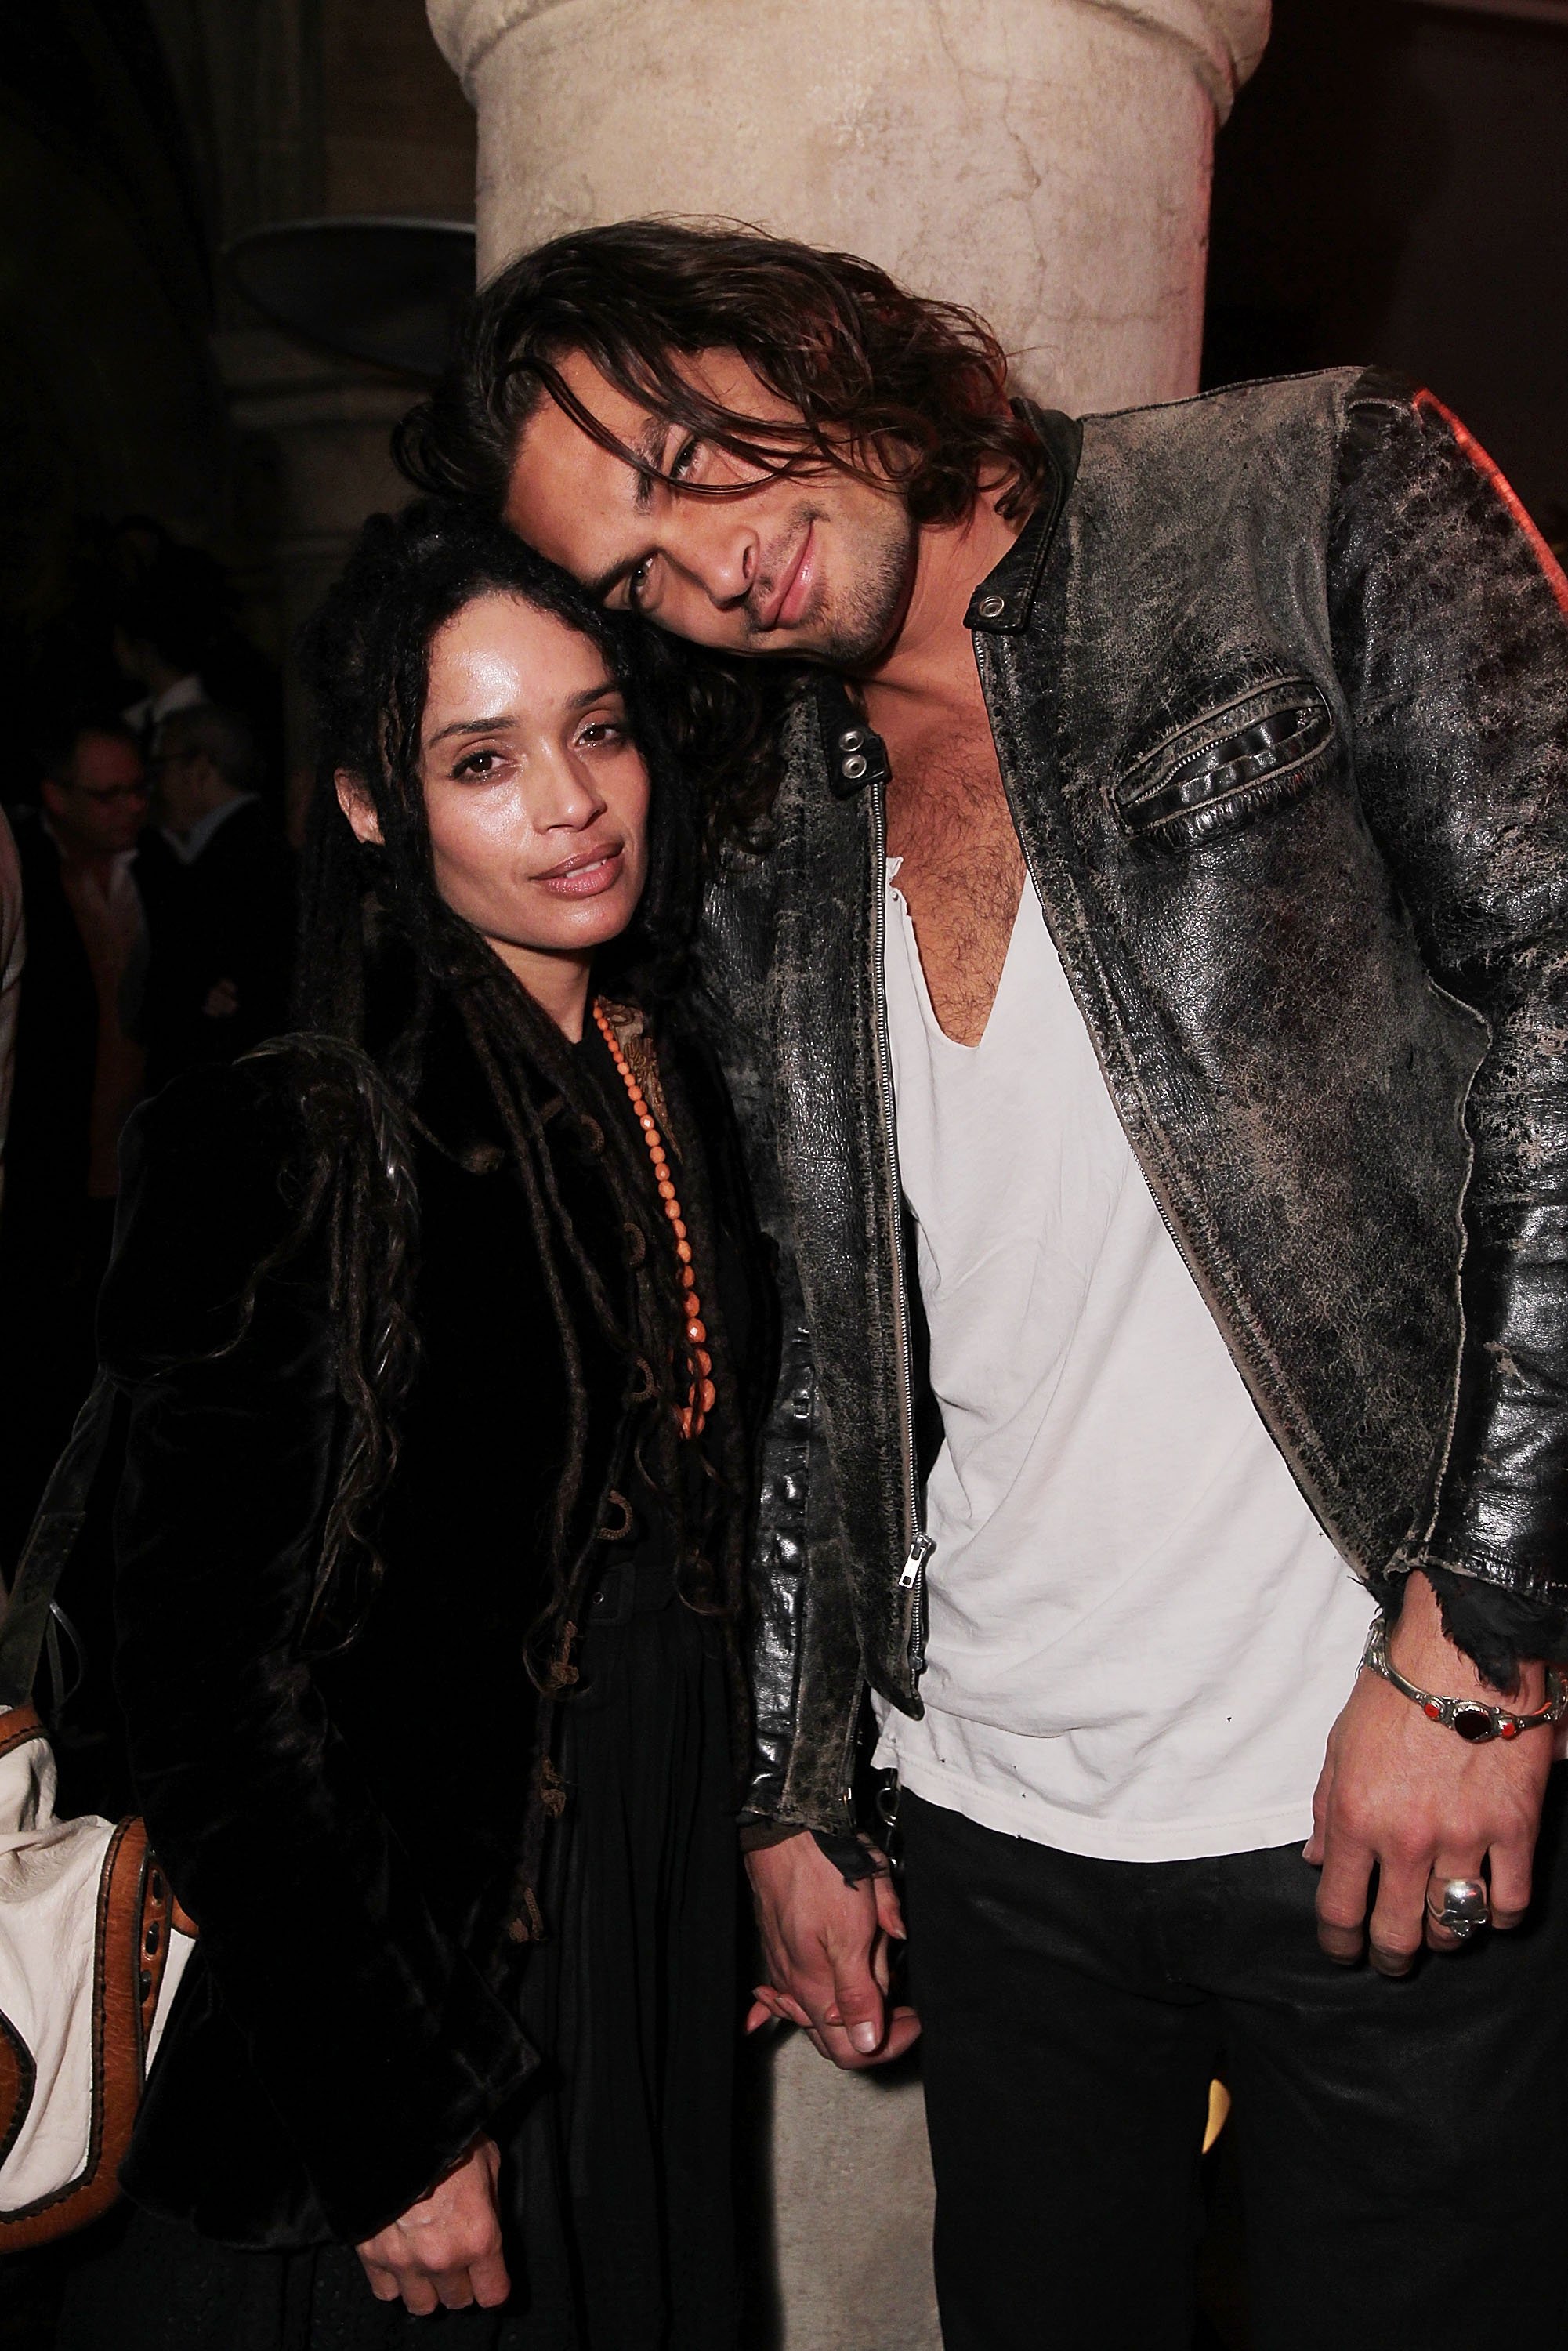 Lisa Bonet and Jason Momoa at Entertainment Weekly's Party to Celebrate the Best Director Oscar Nominees held at Chateau Marmont on February 25, 2010 in Los Angeles, California | Source: Getty Images  